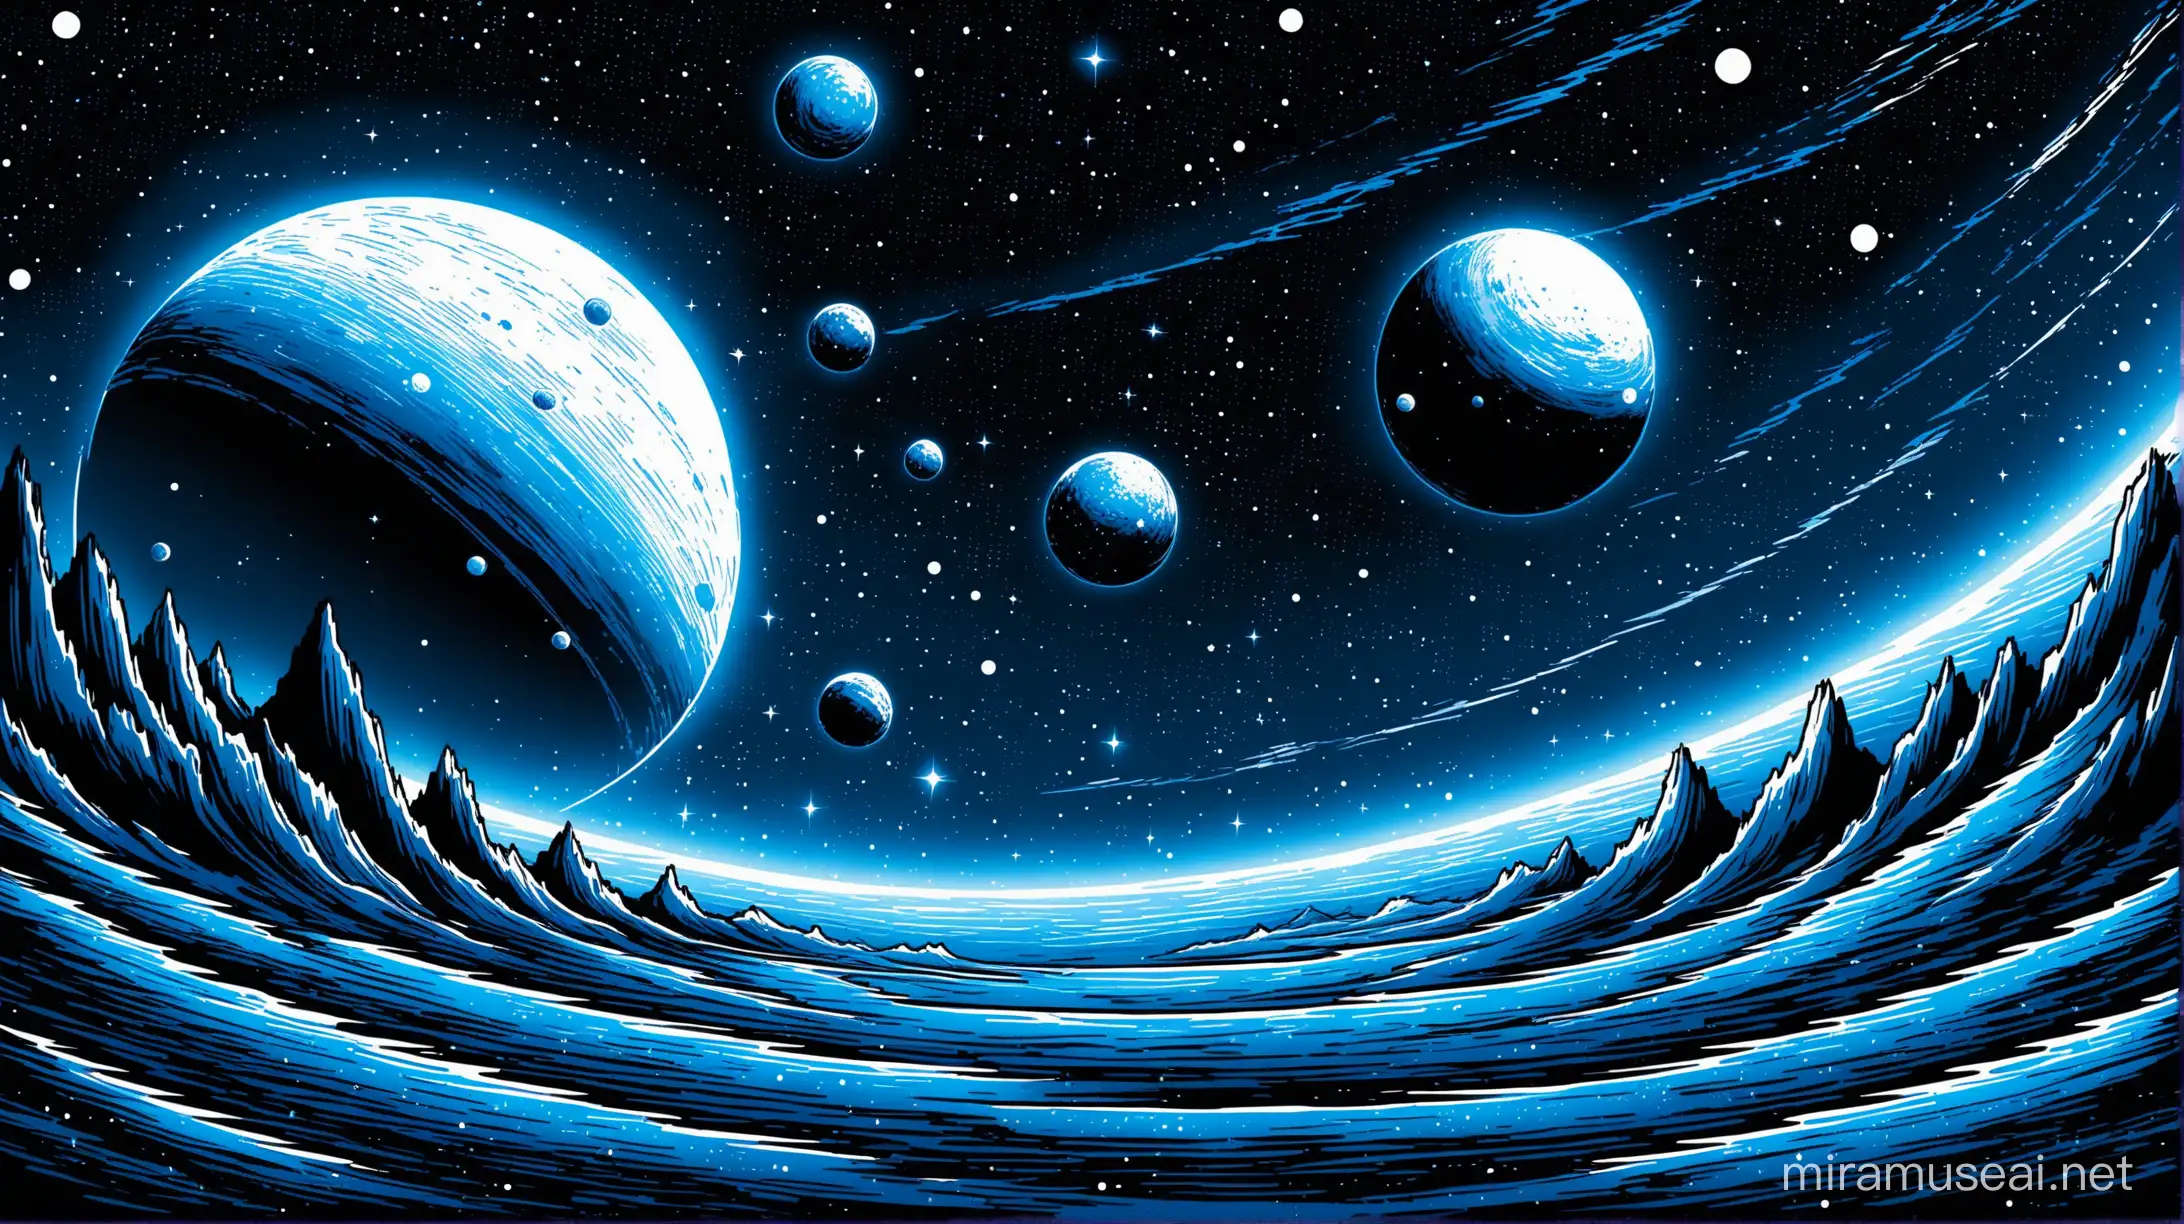 Fantastic Space Landscape Drawing in Blue White and Black Colors